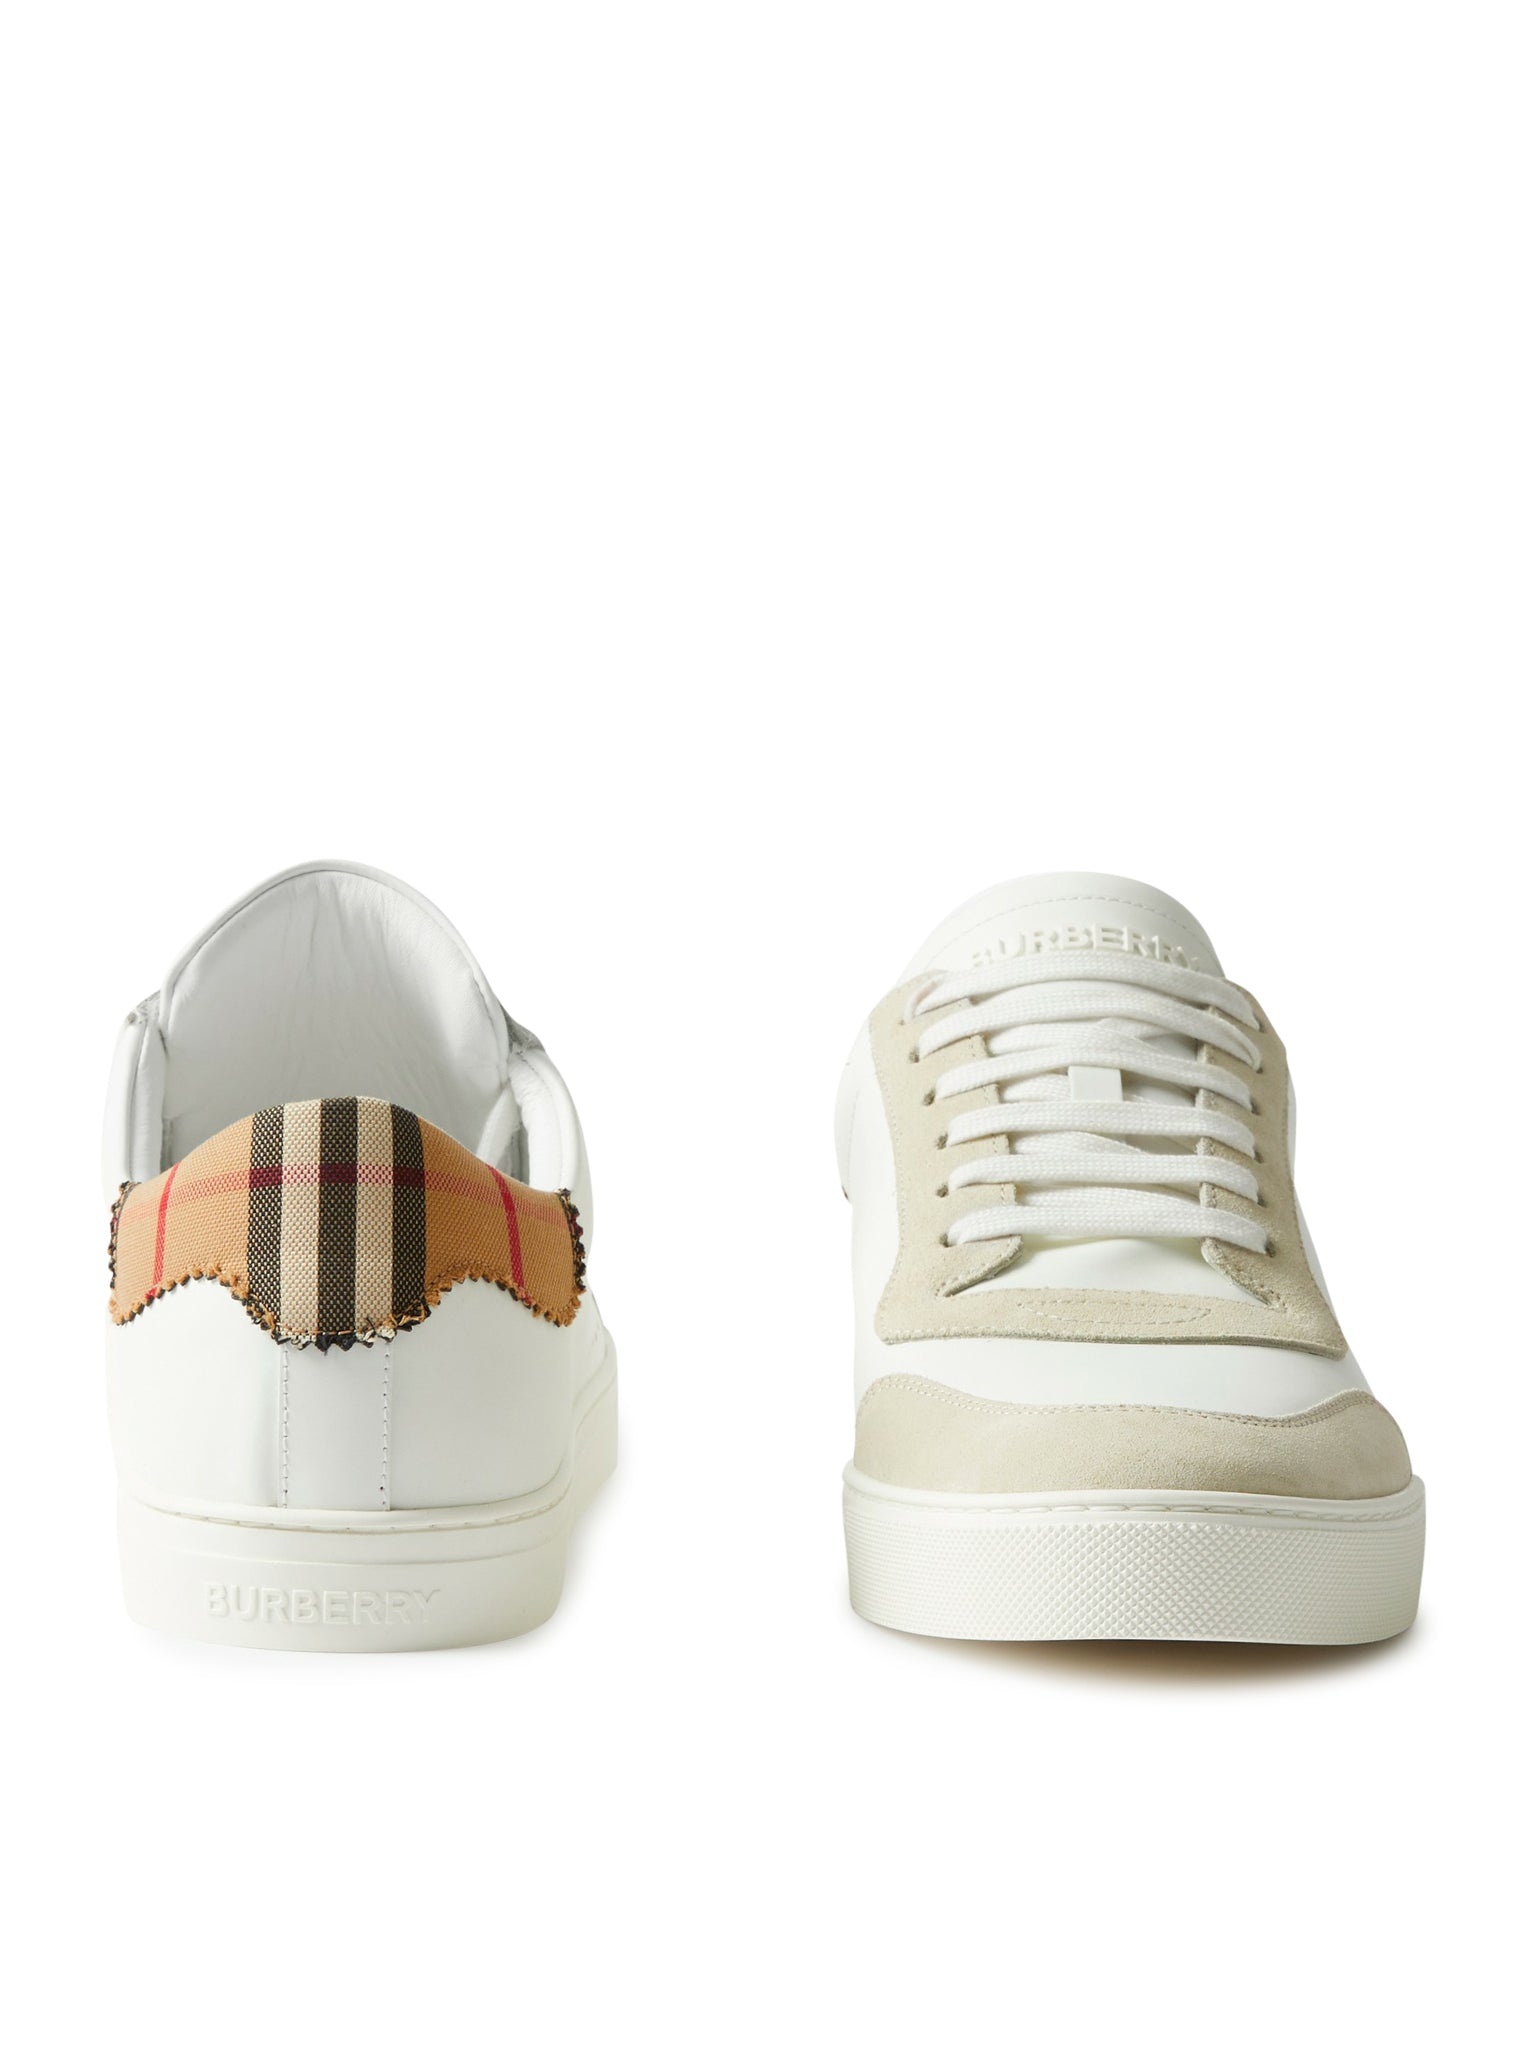 SNEAKER IN LEATHER, SUEDE AND COTTON WITH TARTAN MOTIF - 6